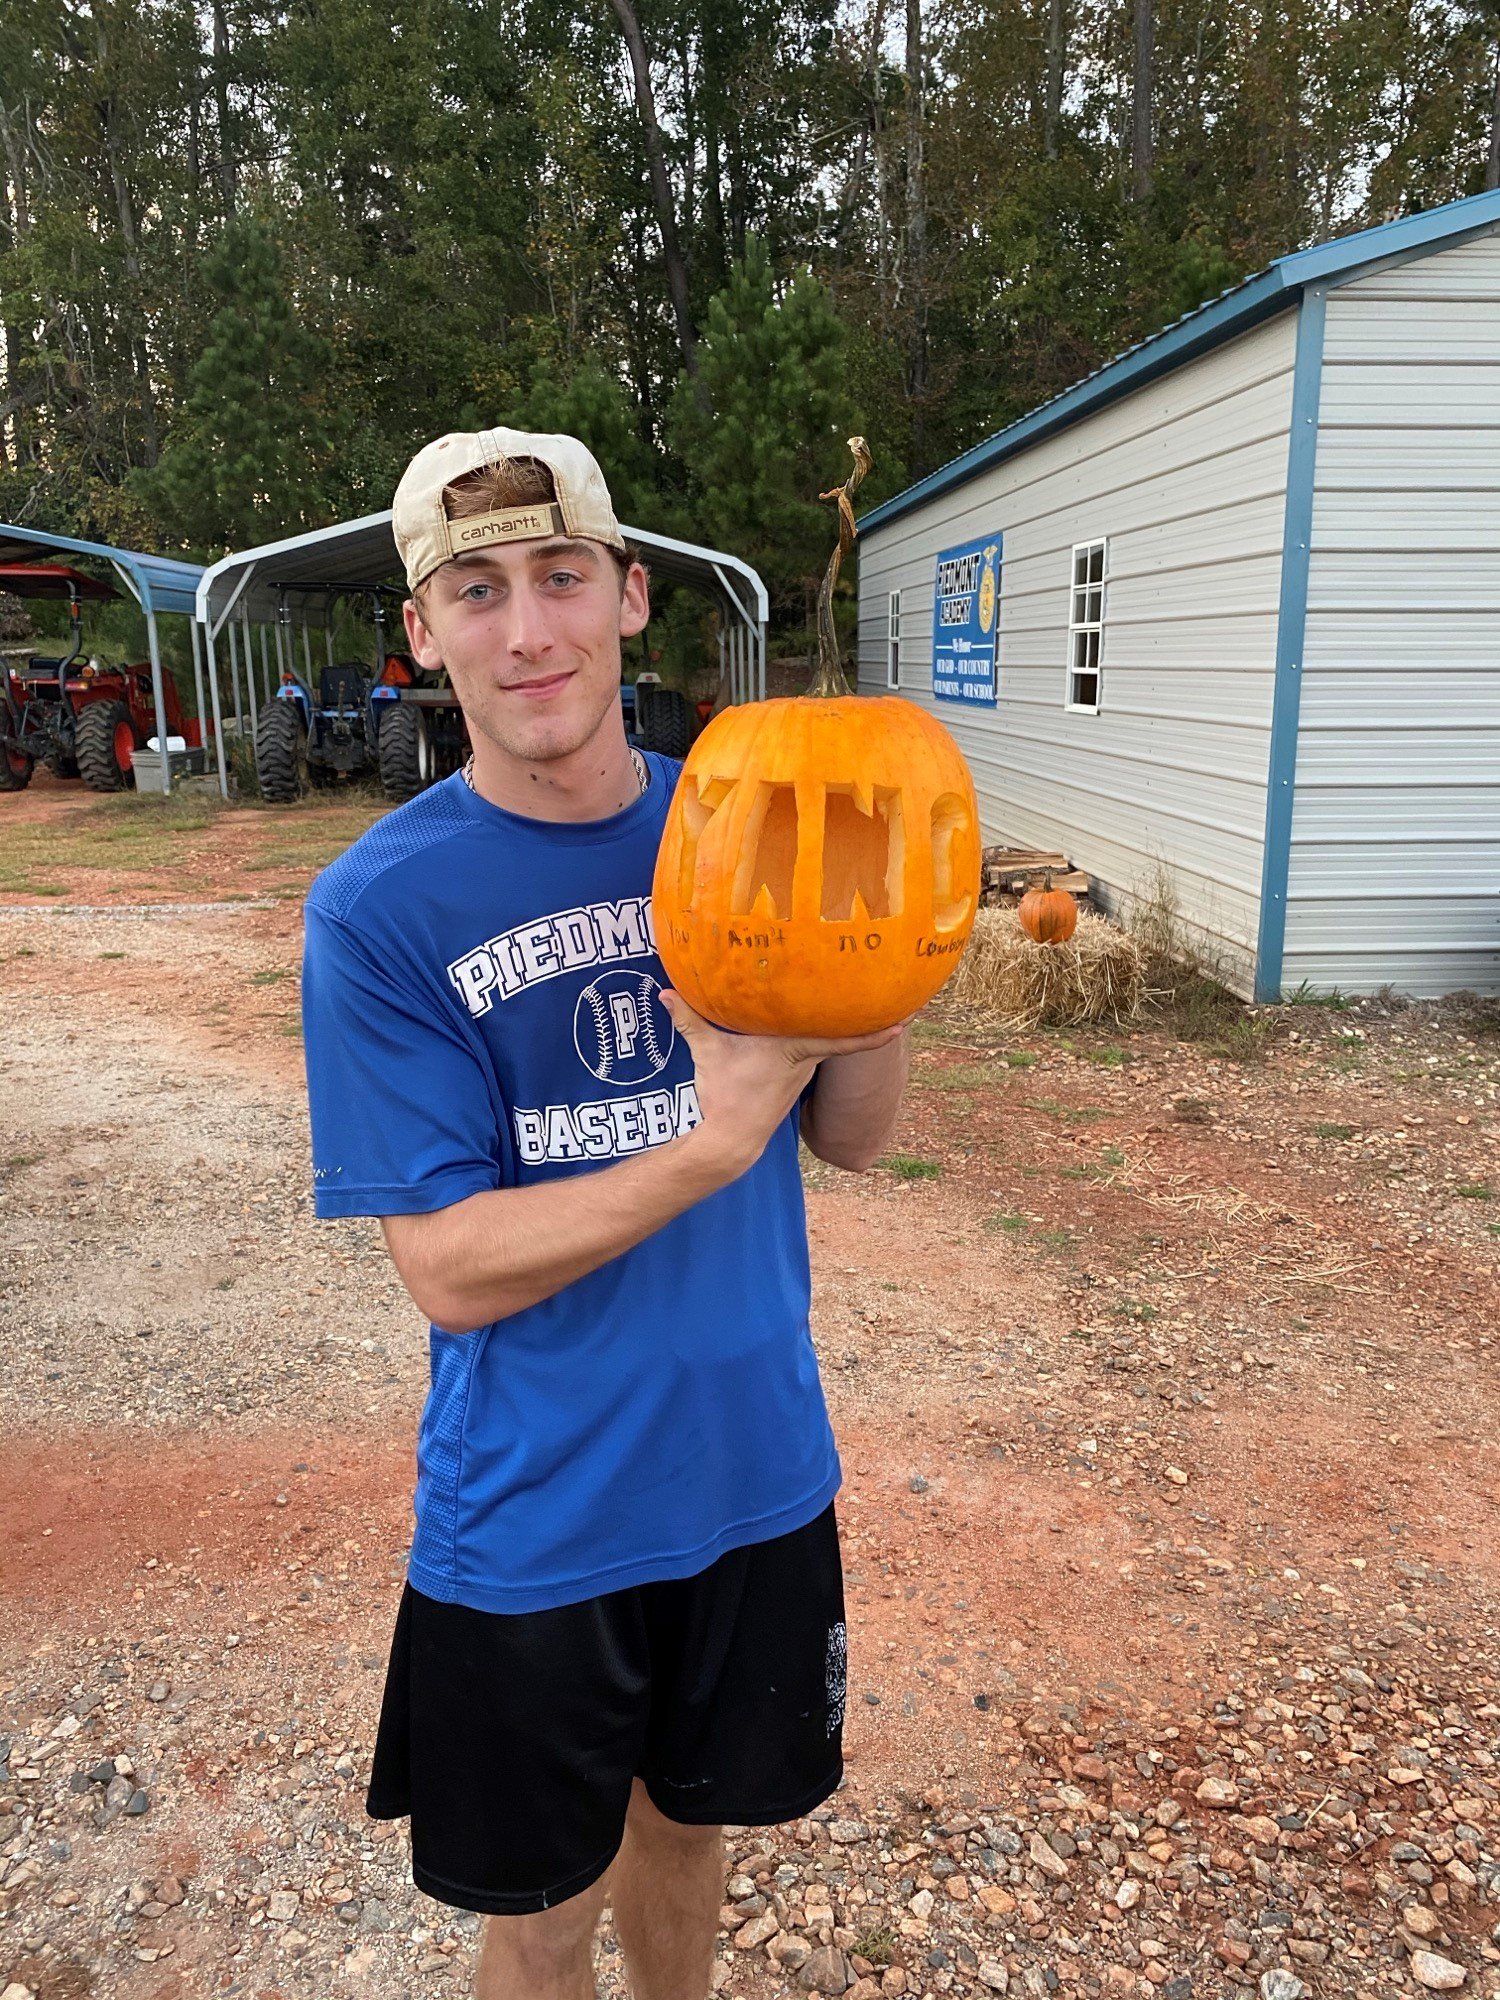 a young man in a blue shirt is holding a carved pumpkin .